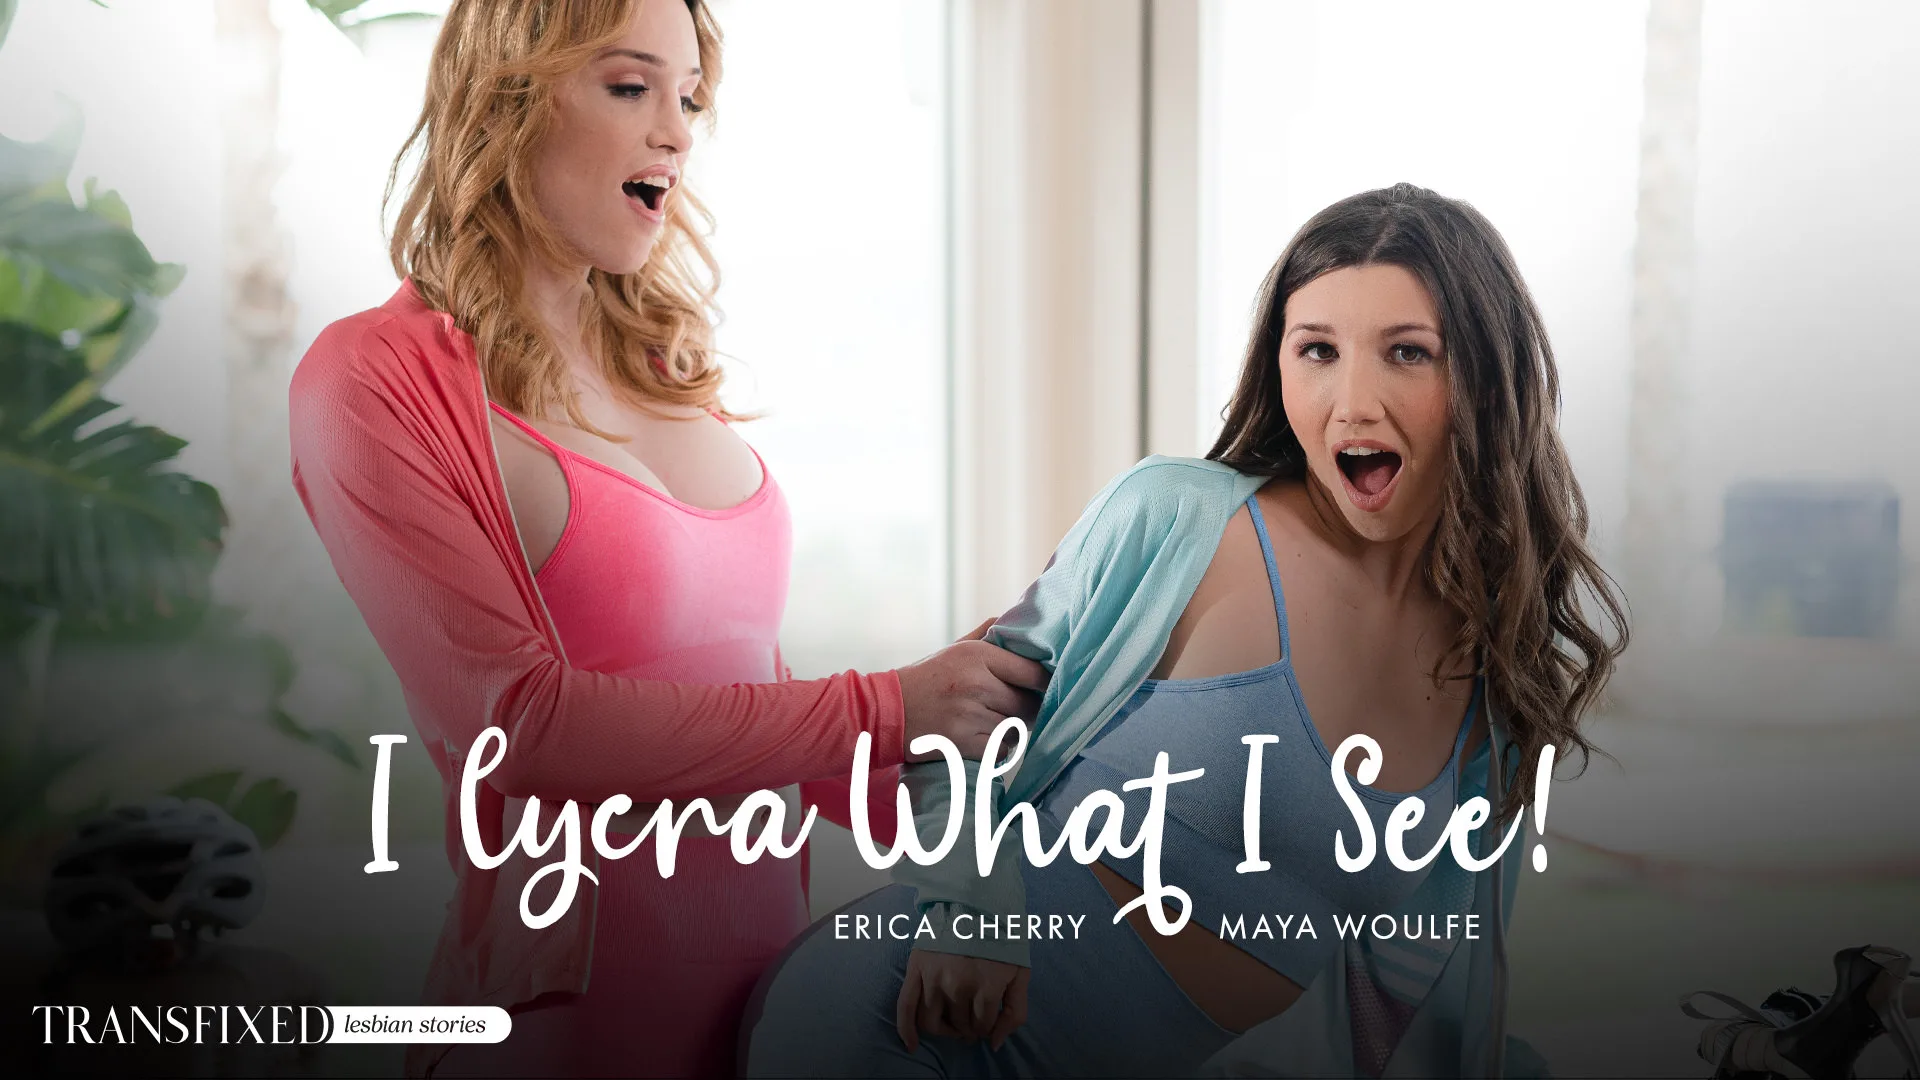 I Lycra What I See! - Transfixed